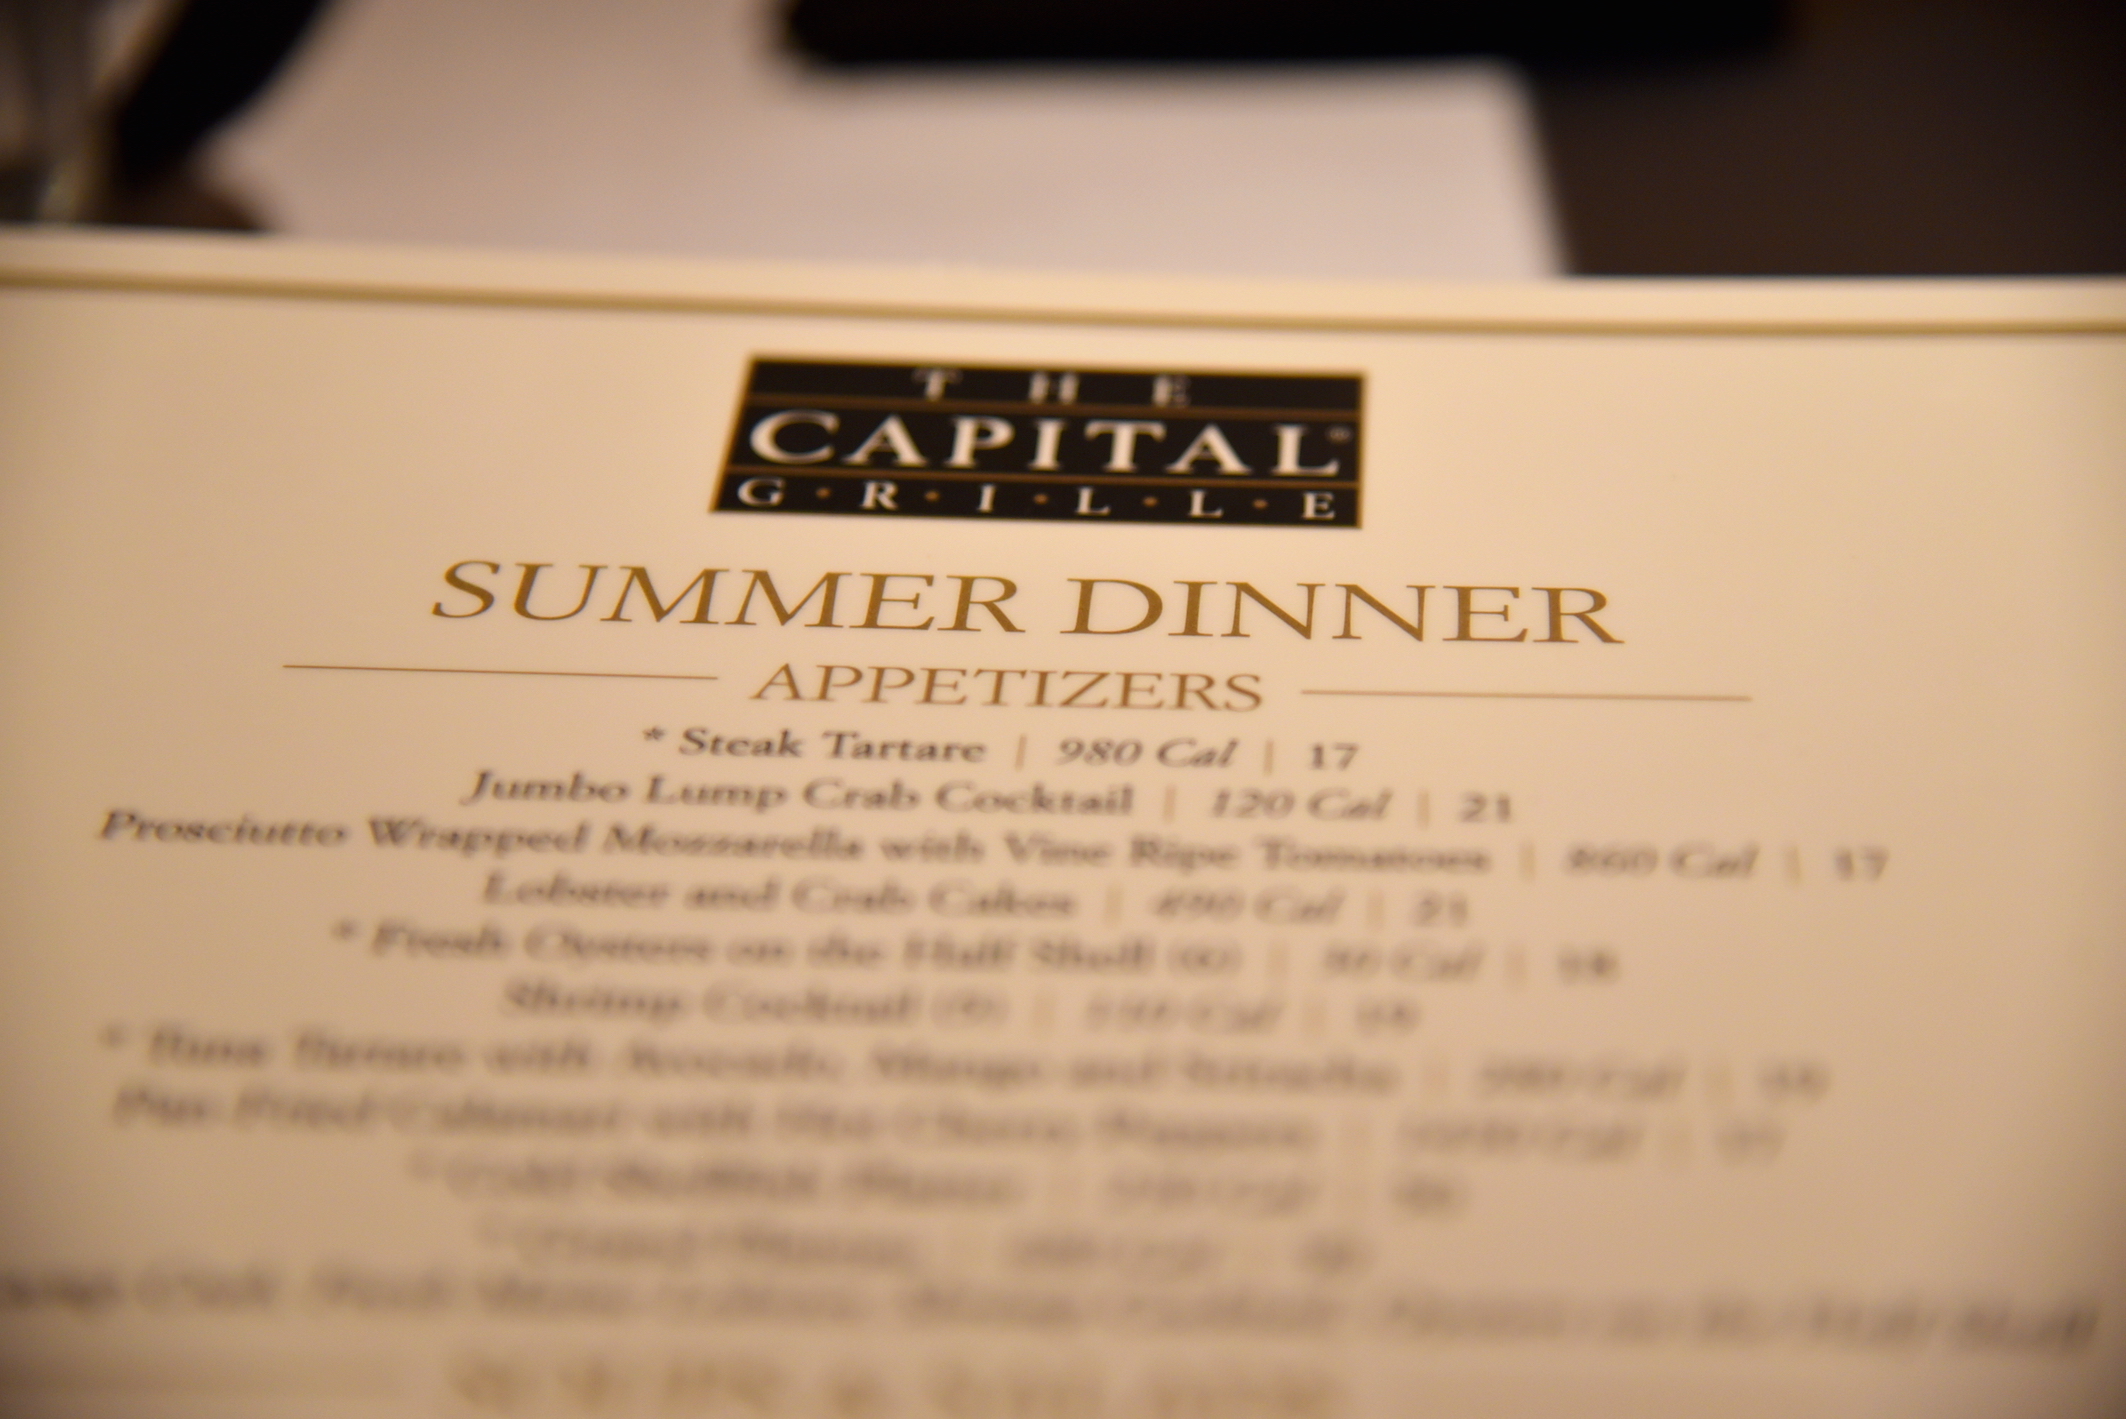 The Capital Grille NYC menu